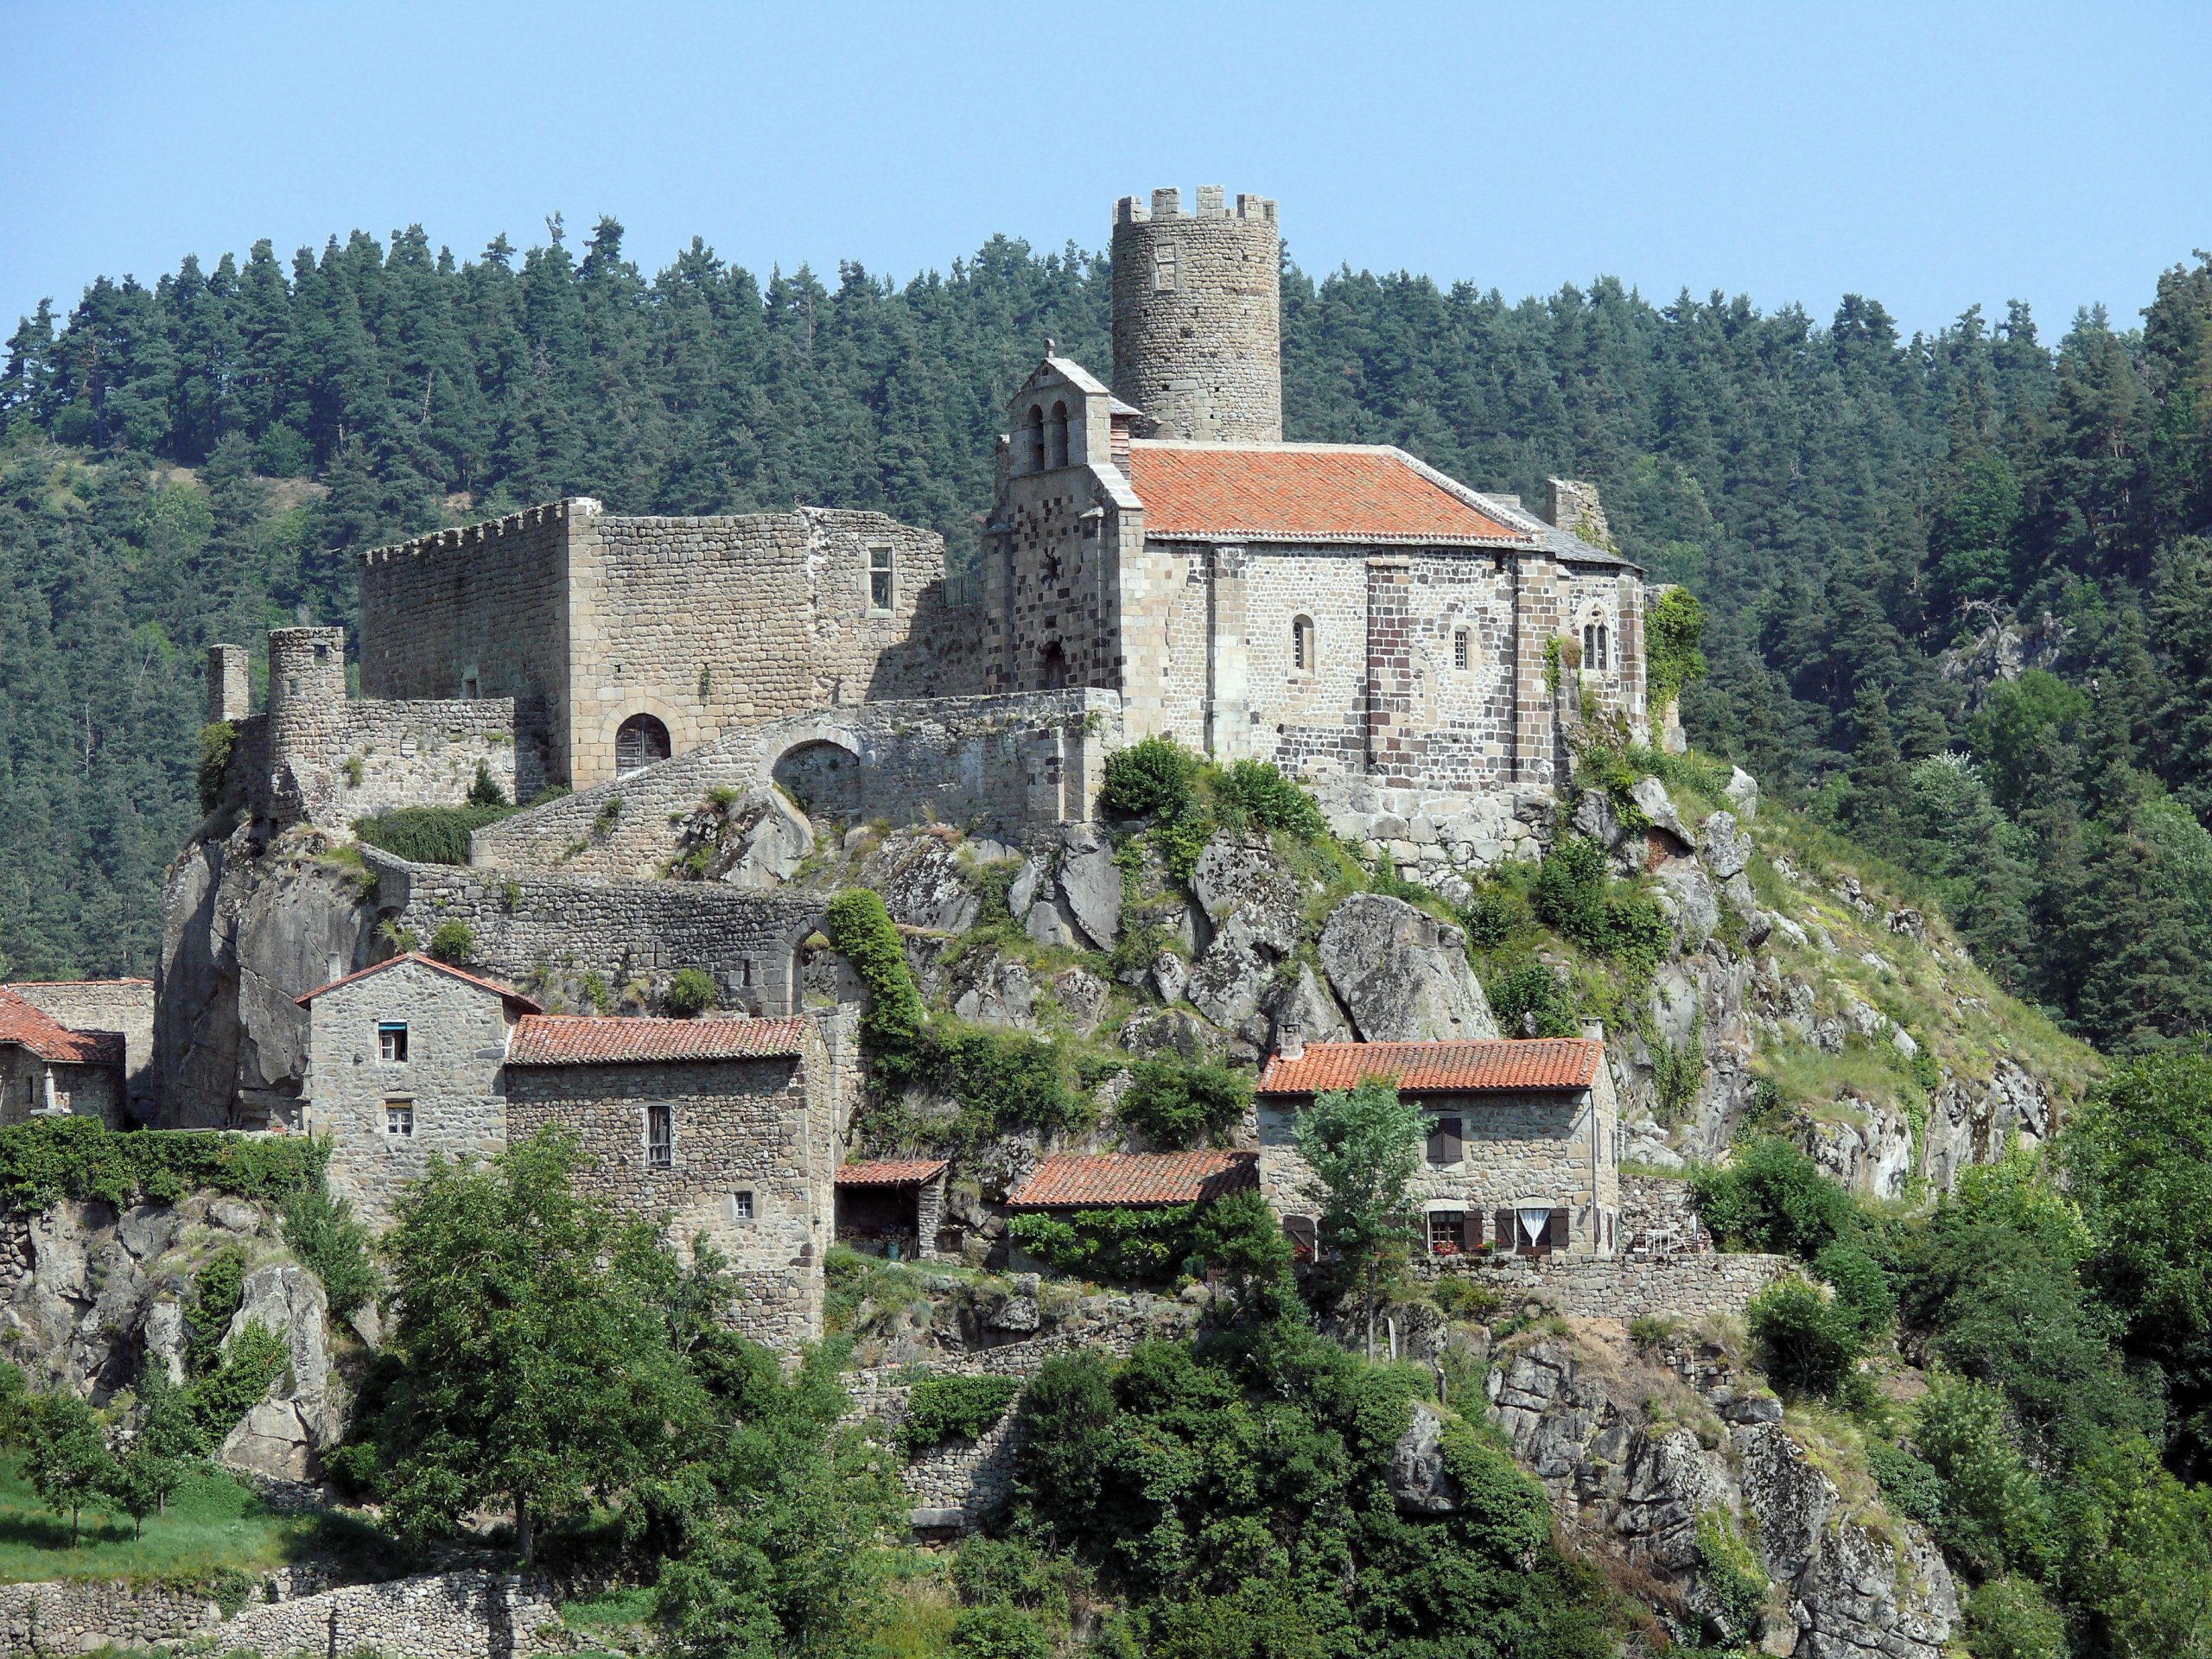 The Château de Chalencon is a feudal monument located in the hamlet of Chalencon